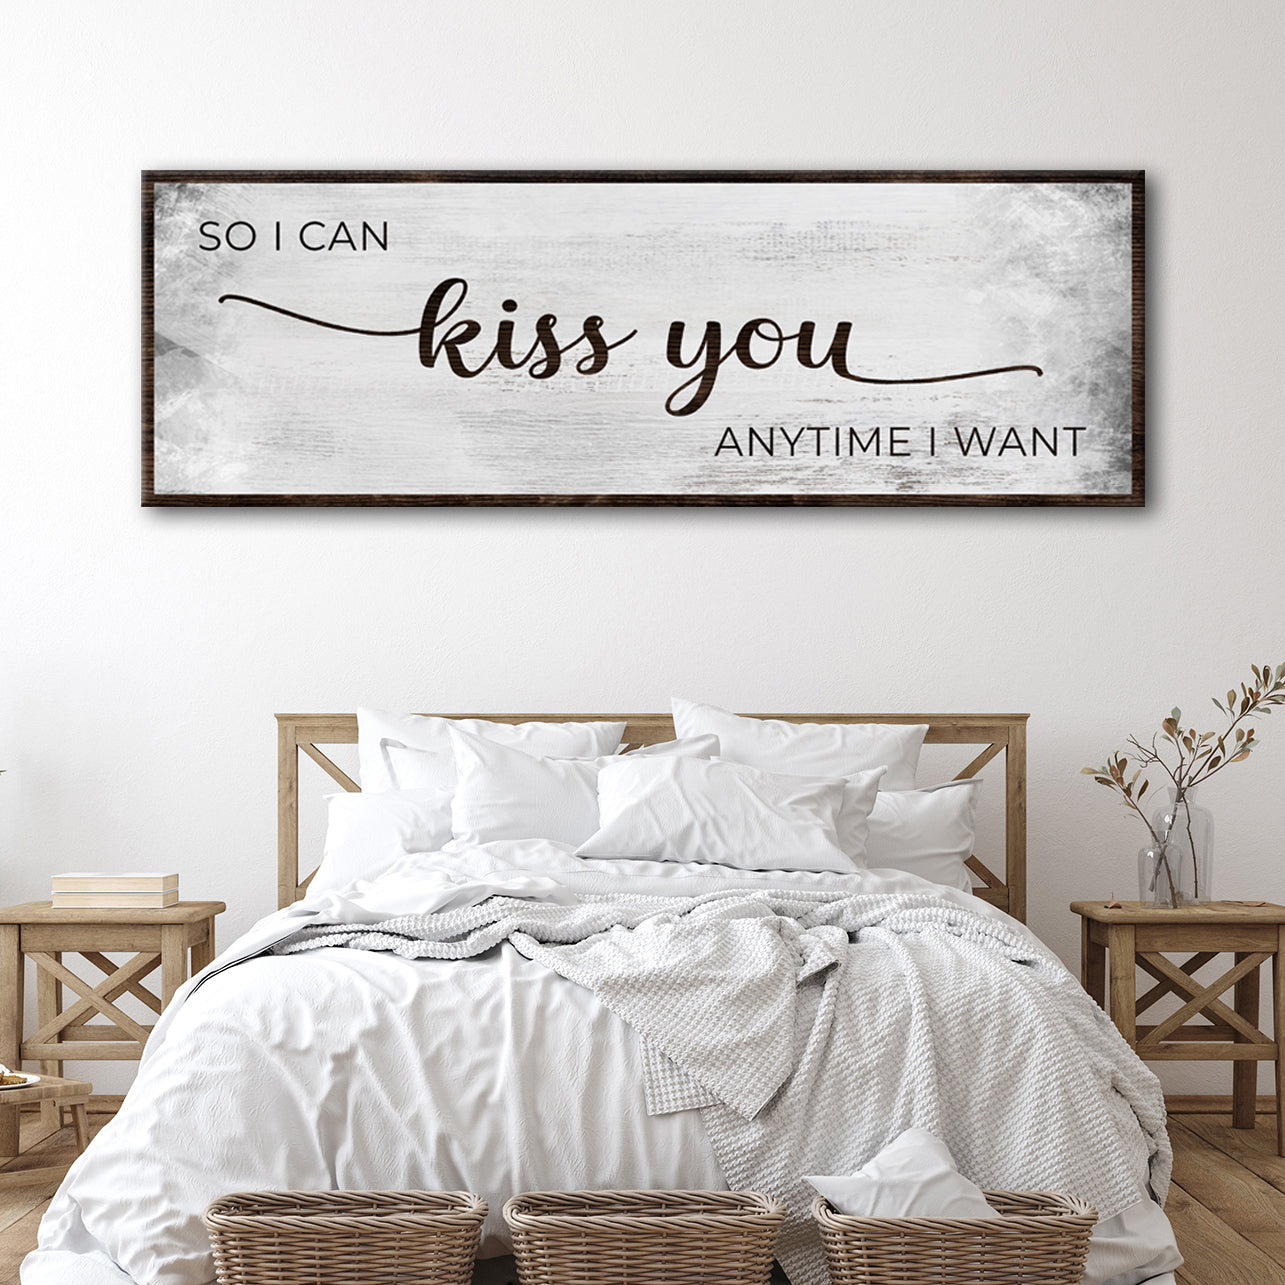 So I Can Kiss You Anytime I Want Grunge Sign (Free Shipping)